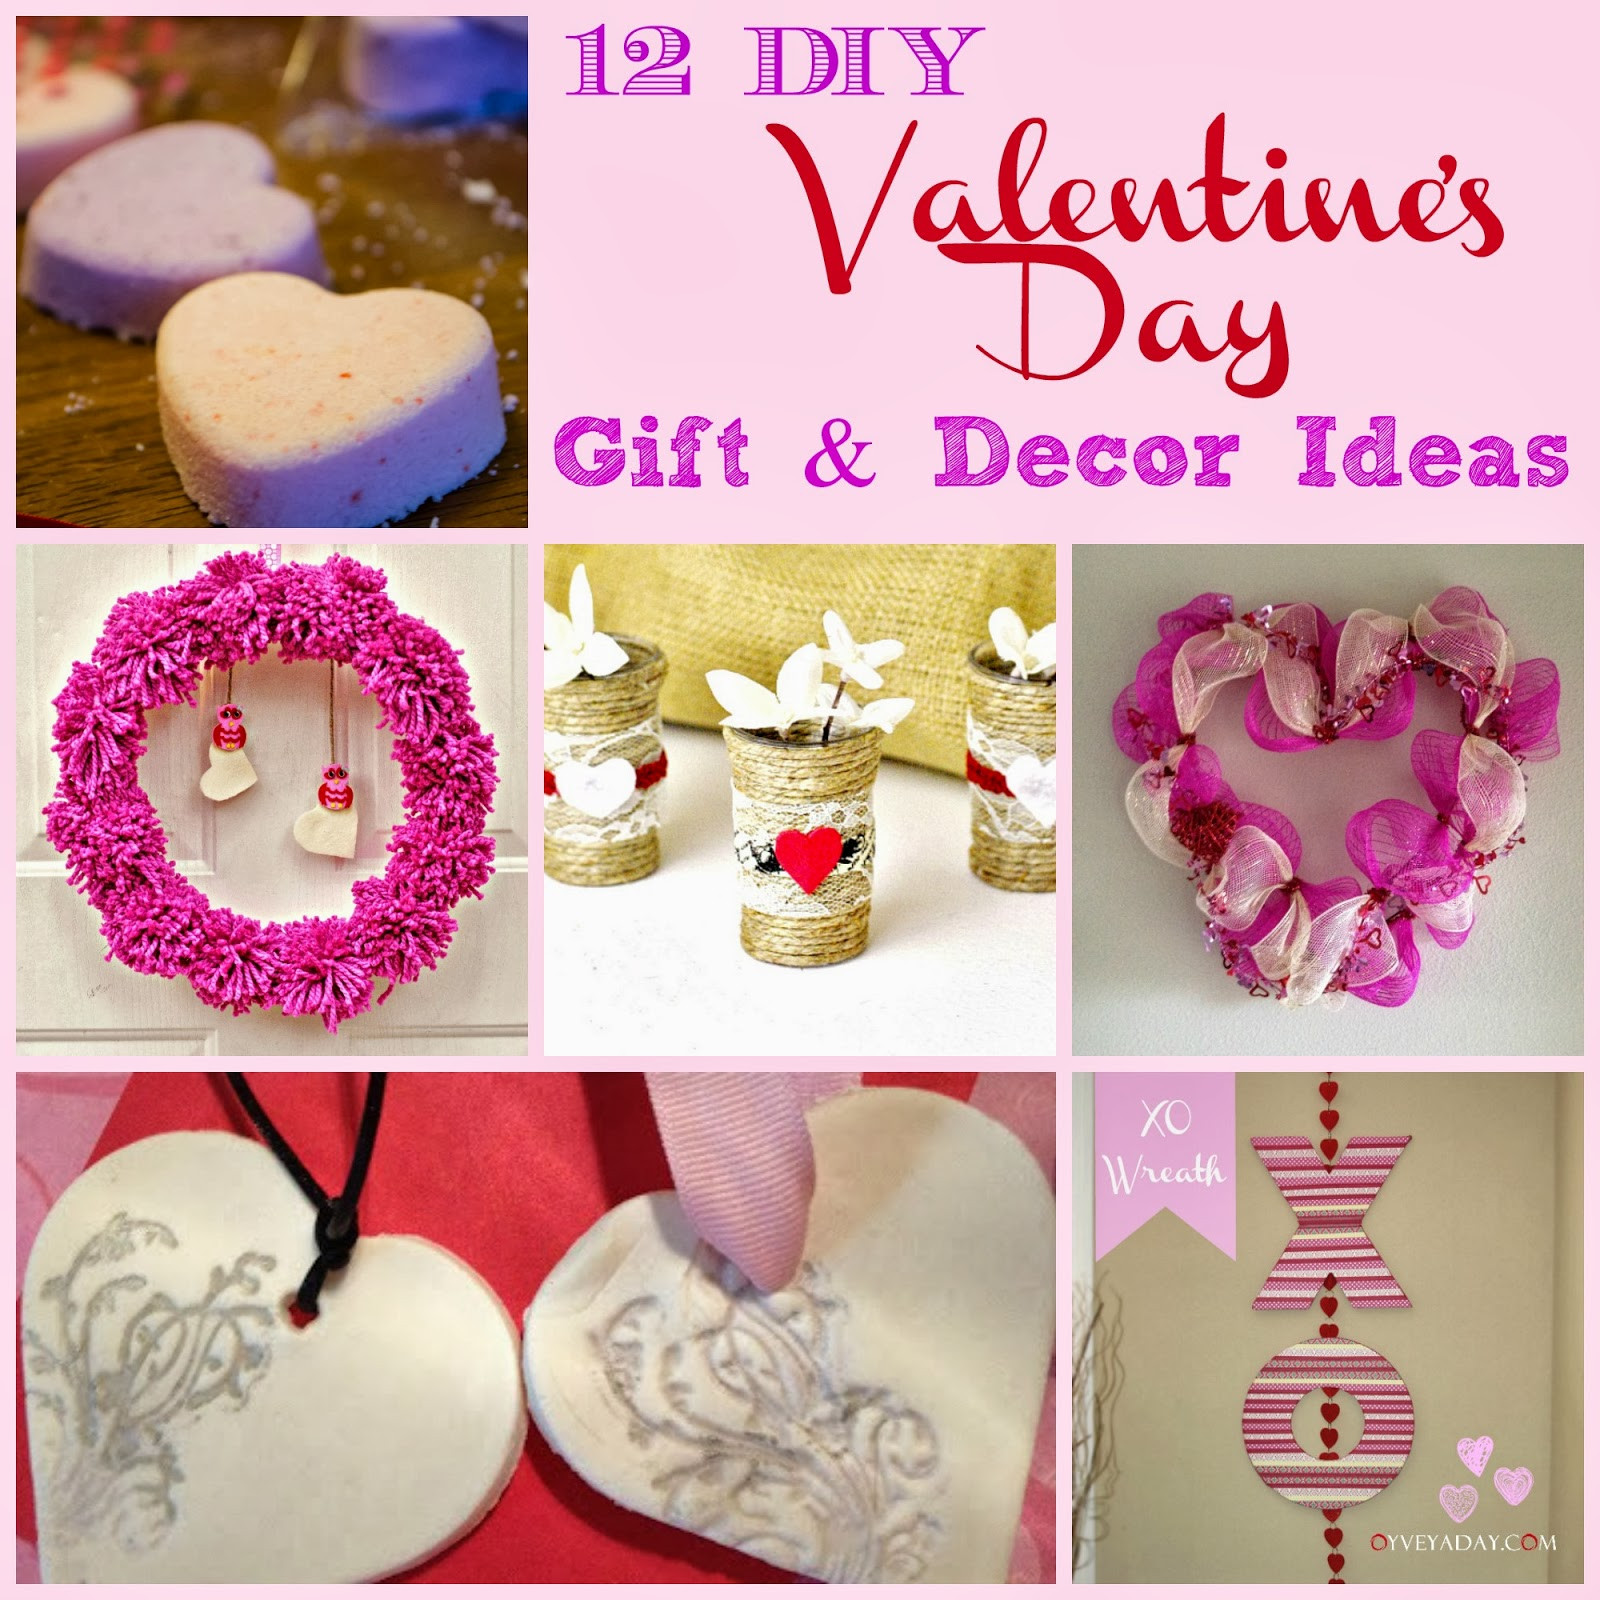 Homemade Valentines Day Gifts
 12 DIY Valentine s Day Gift & Decor Ideas Outnumbered 3 to 1